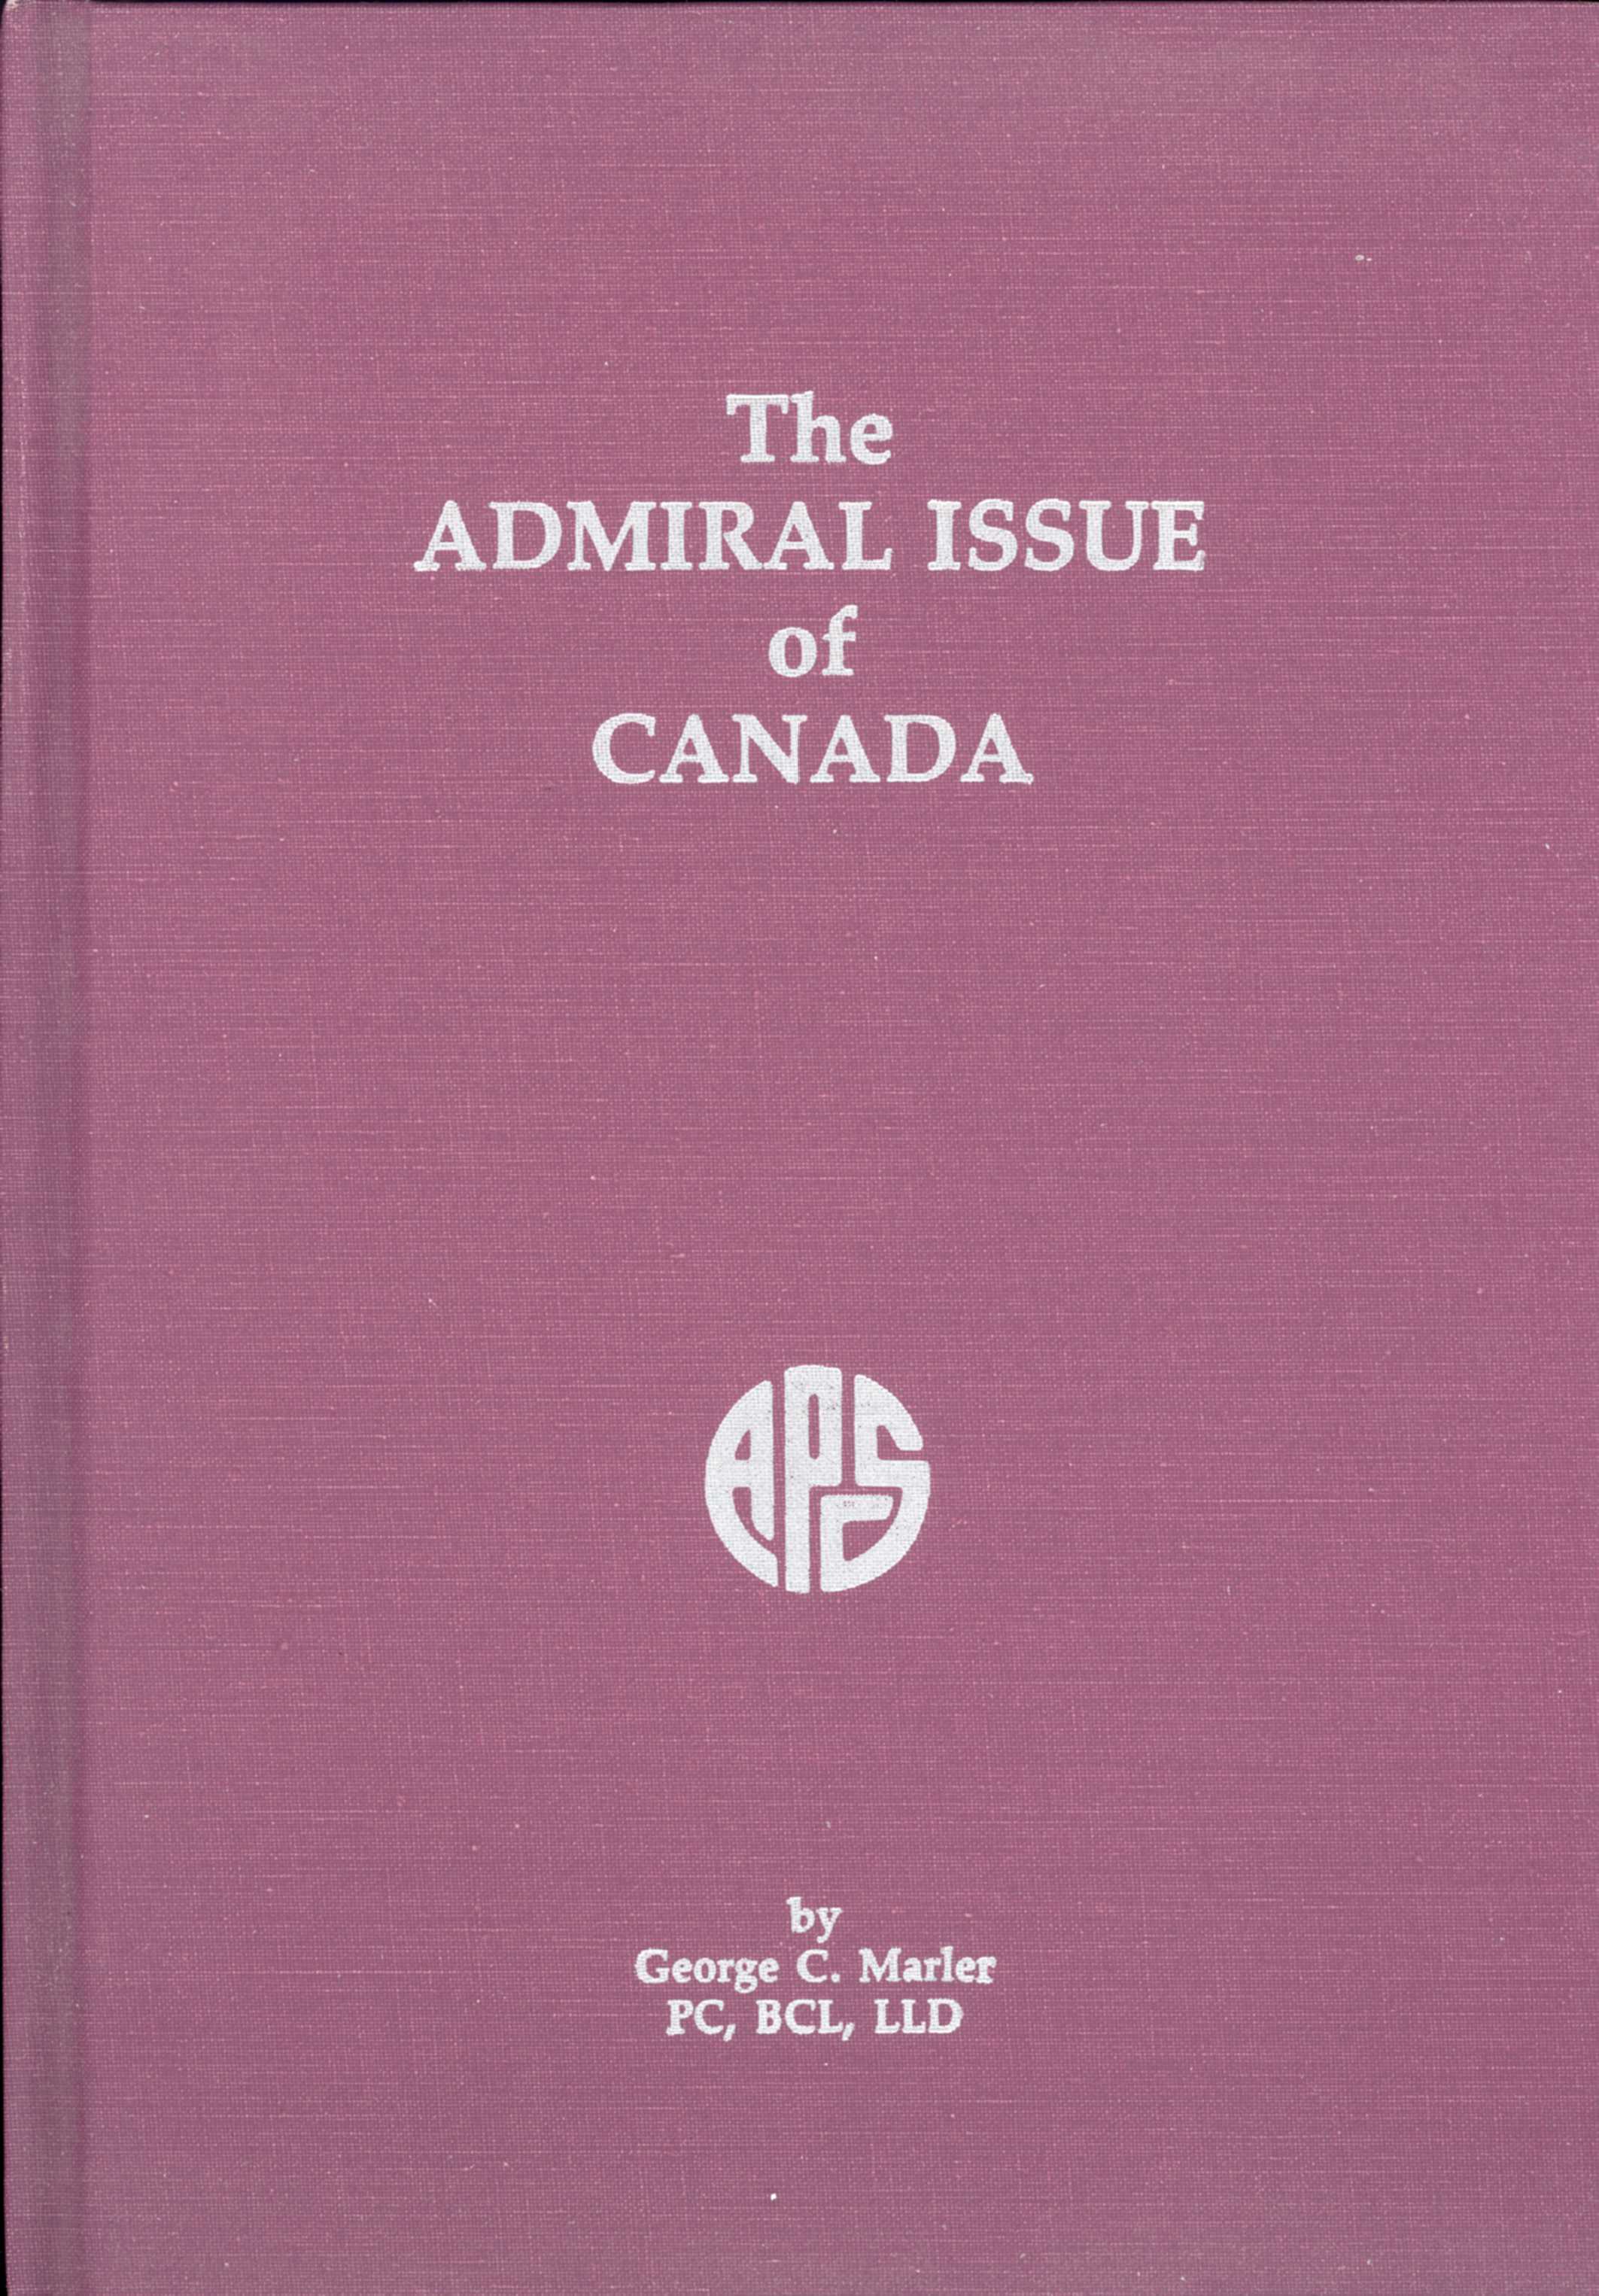 Front cover of the book 'The Admiral Issue of Canada' by George C. Marler